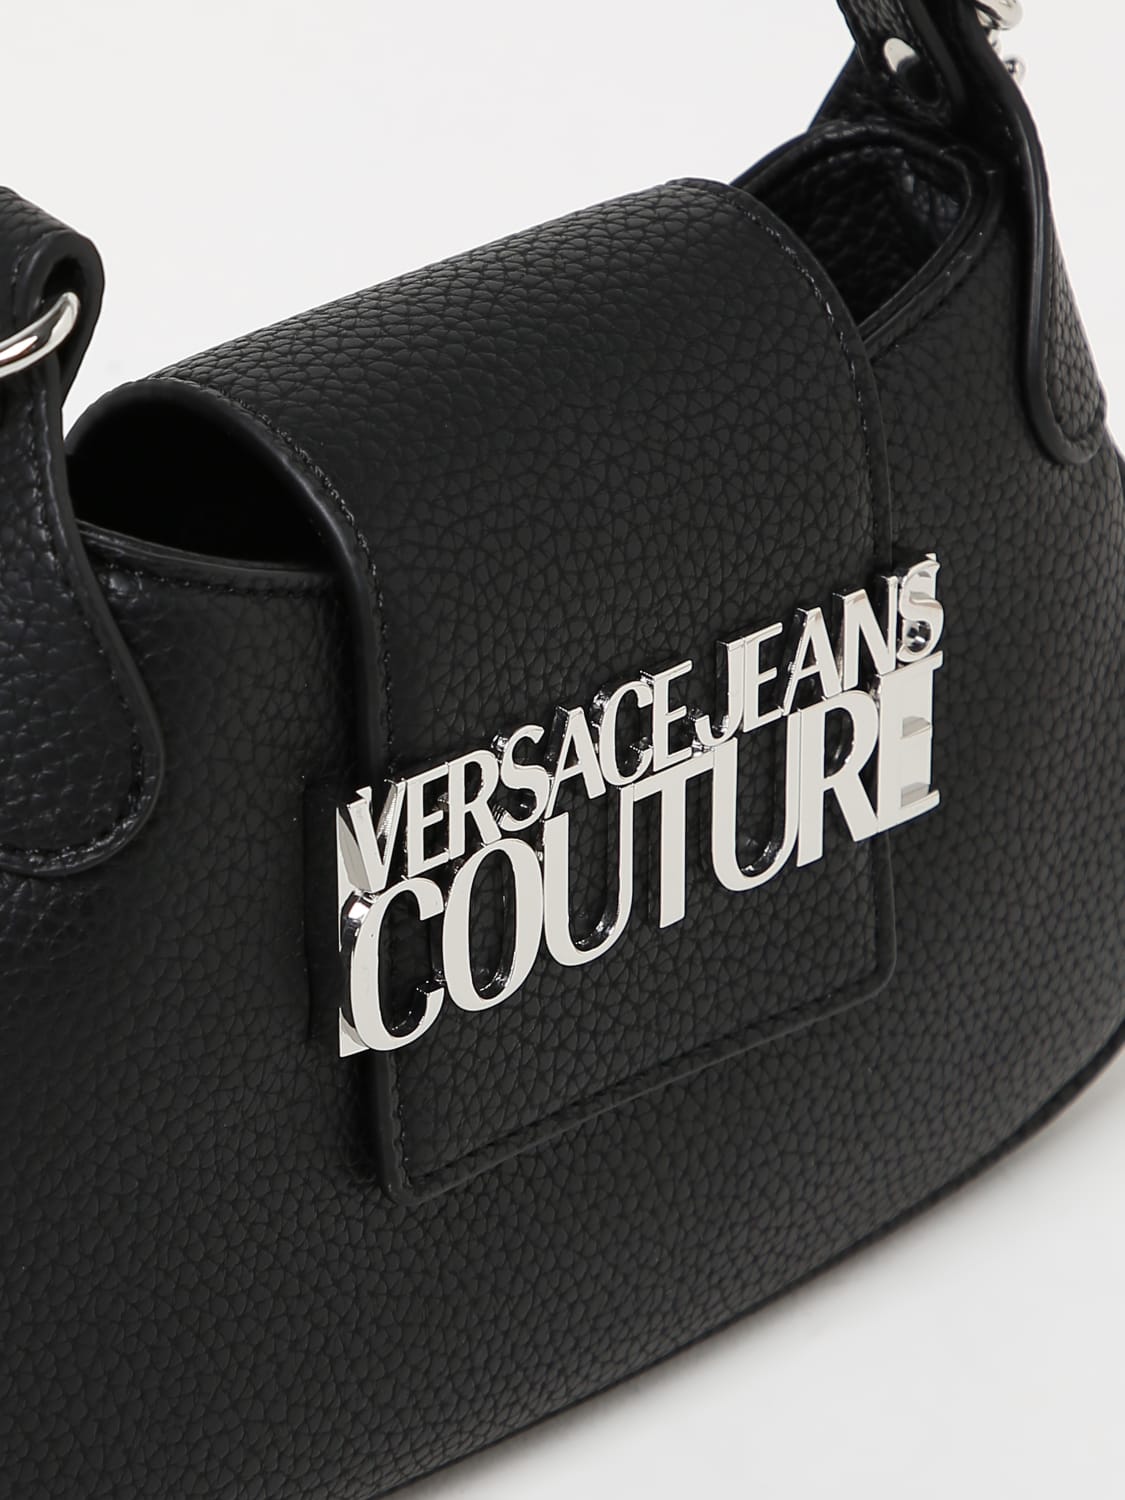 VERSACE JEANS COUTURE：クロスボディバッグ レディース - ブラック ...